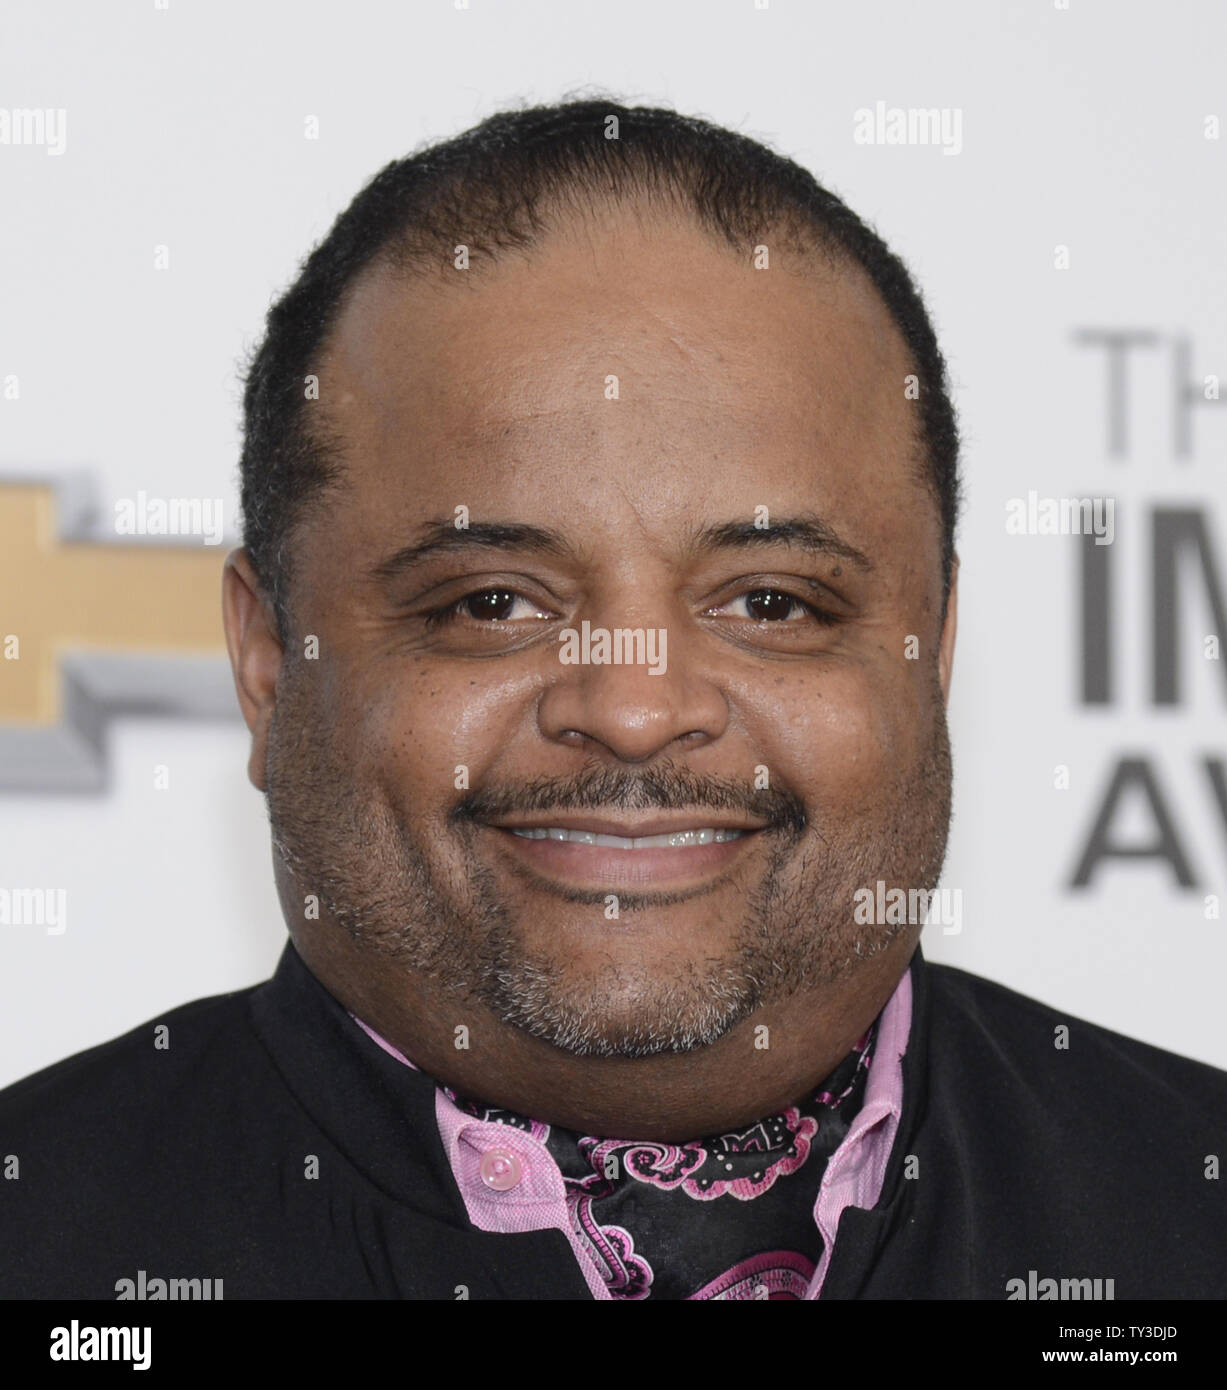 CNN analyst Roland Martin and his wife Jacquie Hood Martin Summer Groove  Benefit Dinner at Seminole Hard Rock Hotel Hollywood Stock Photo - Alamy